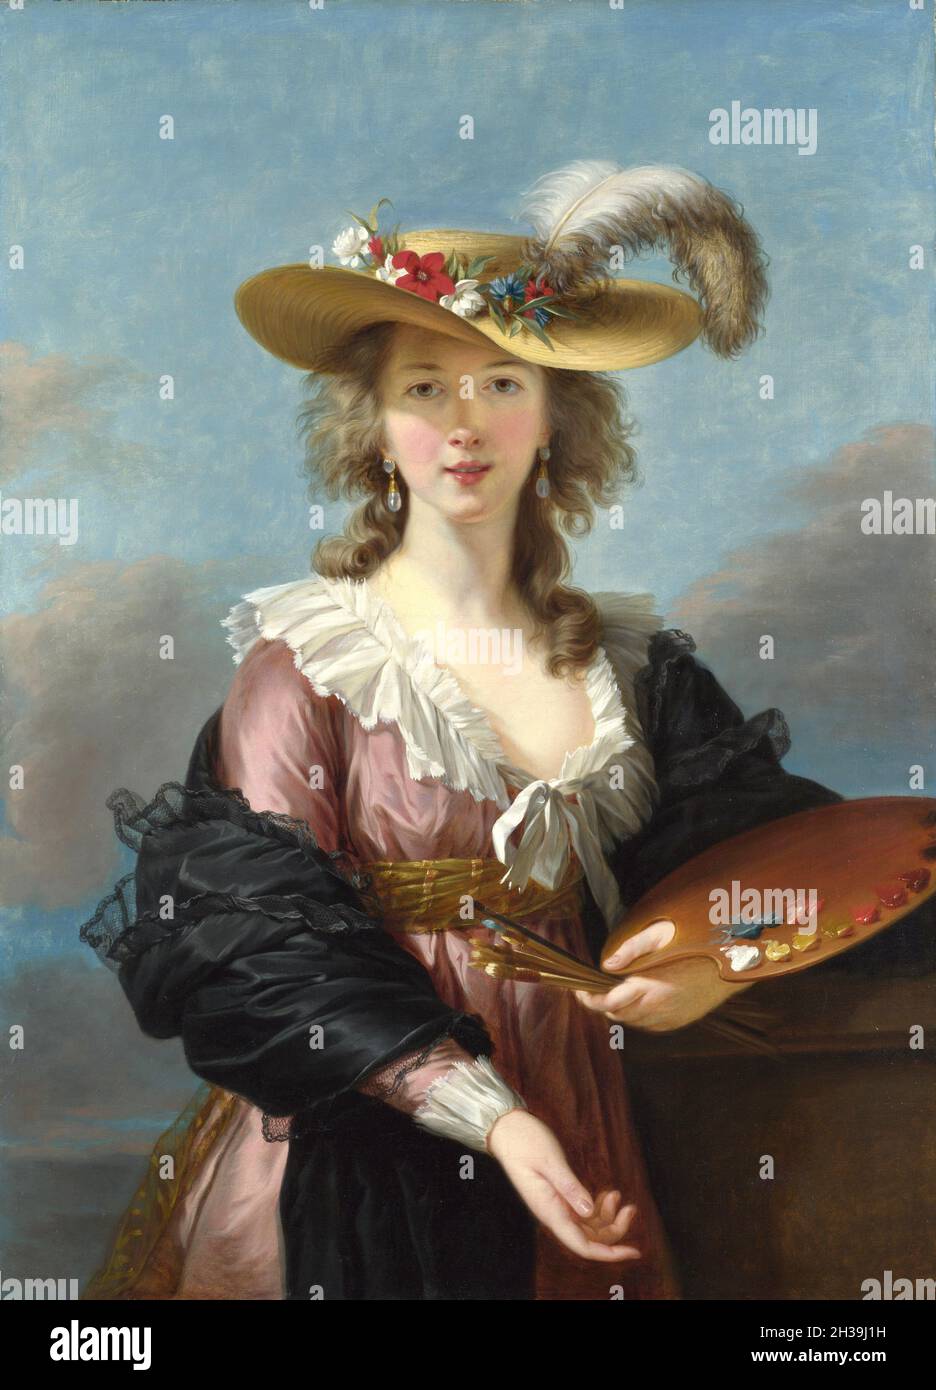 Self Portrait in a straw hat - Élisabeth Louise Vigée Le Brun, (Madame Le Brun) was a prominent French portrait painter of the late 18th century. Stock Photo